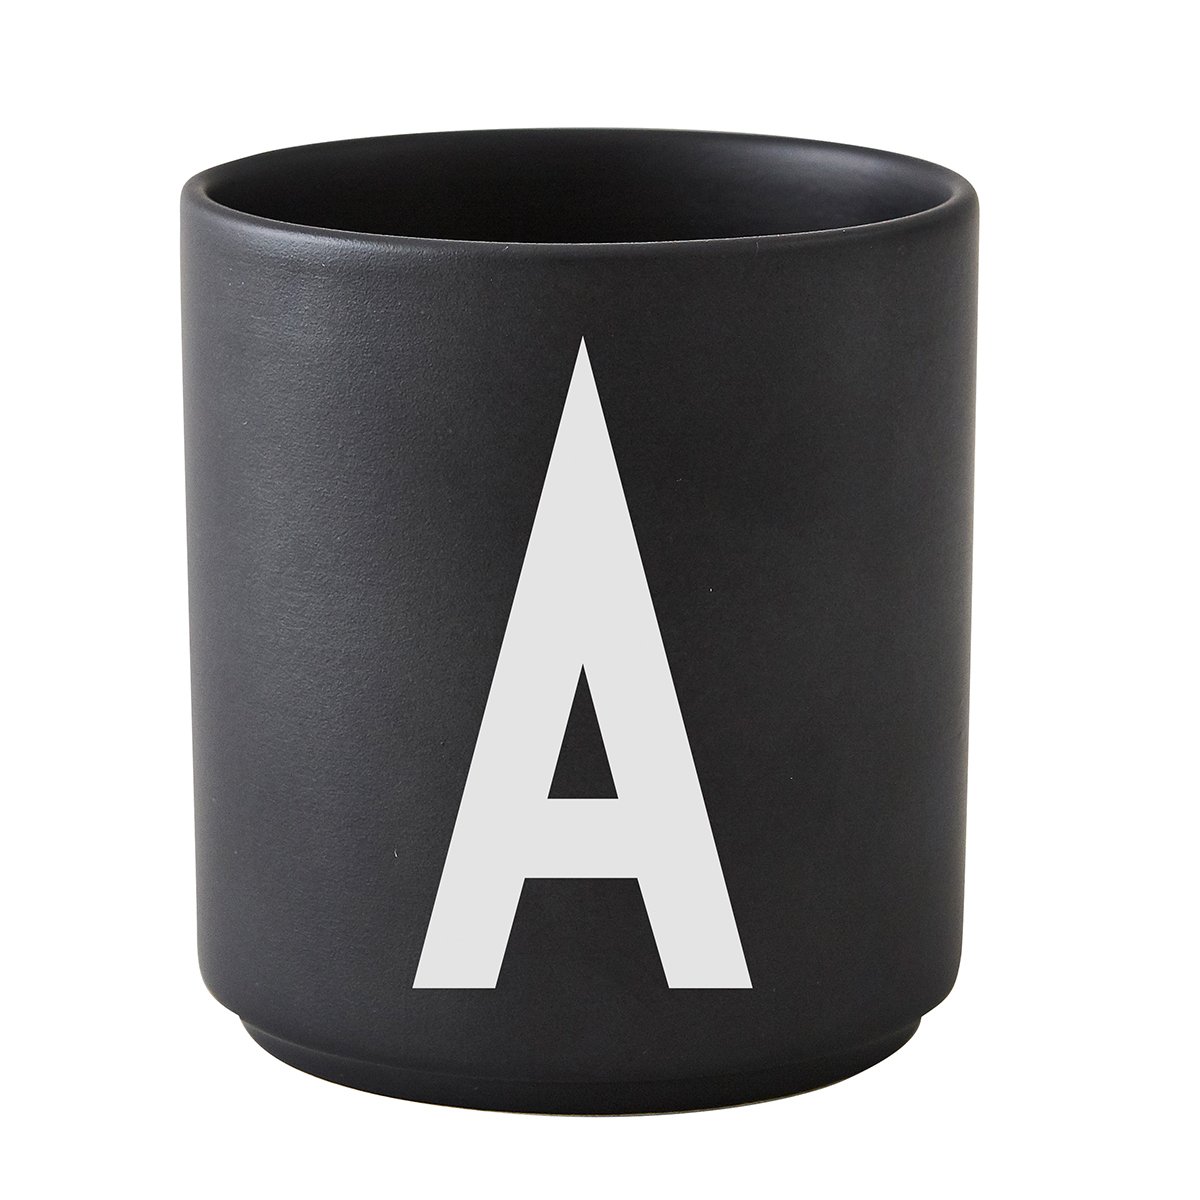  Design Letters Porcelain Coffee Mug, Gifts for Mom, Initial  Coffee Cup Perfect for Mother's Day Gift, Ceramic Cup Used as Bathroom  Accessories/Tumbler/Makeup Brush Holder